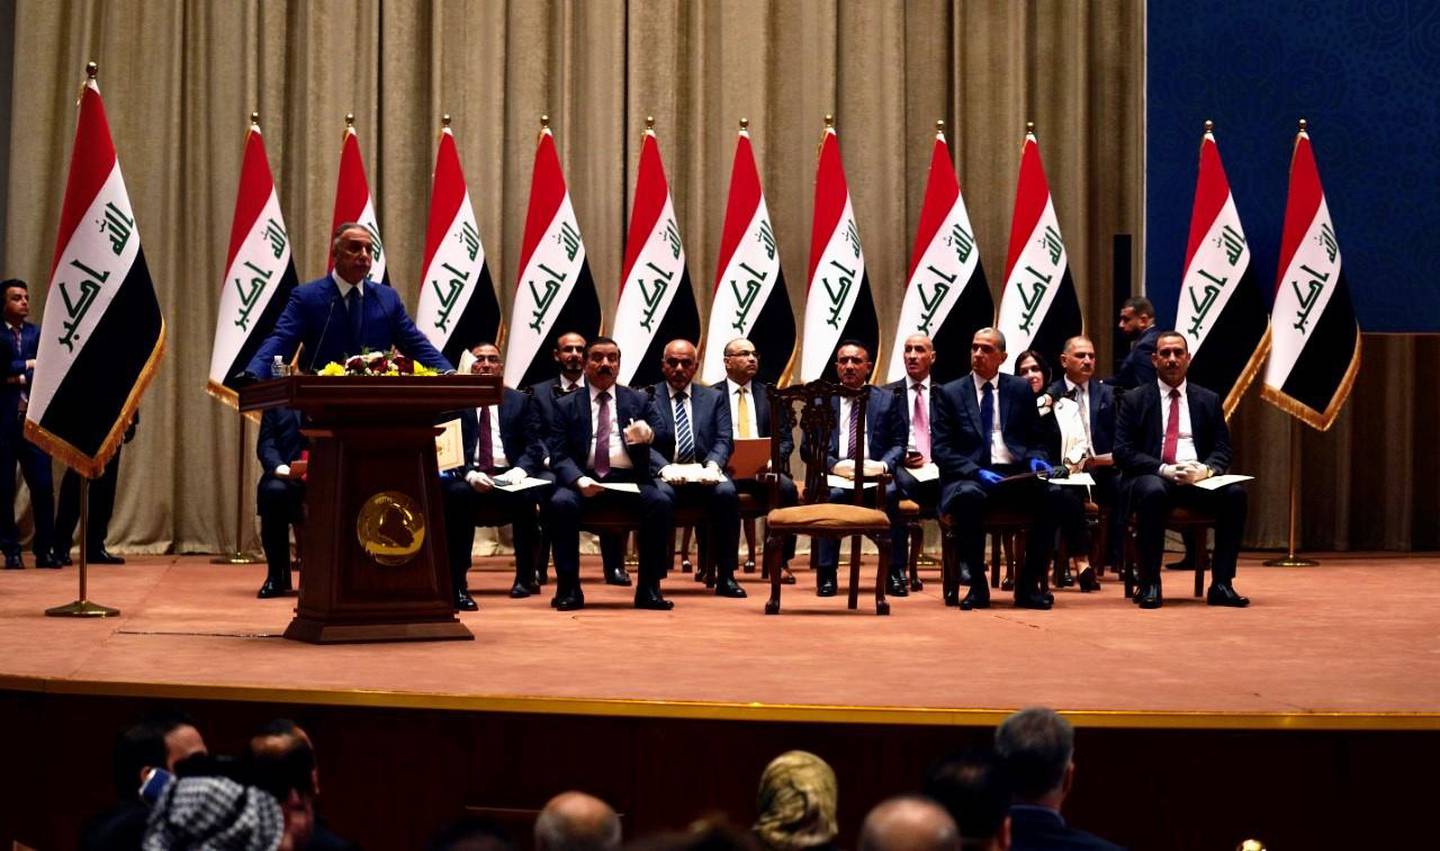 In his address to Parliament Mustafa Al Kadhimi vowed to hold transparent and early elections, restrict access to weapons and curb corruption. The National